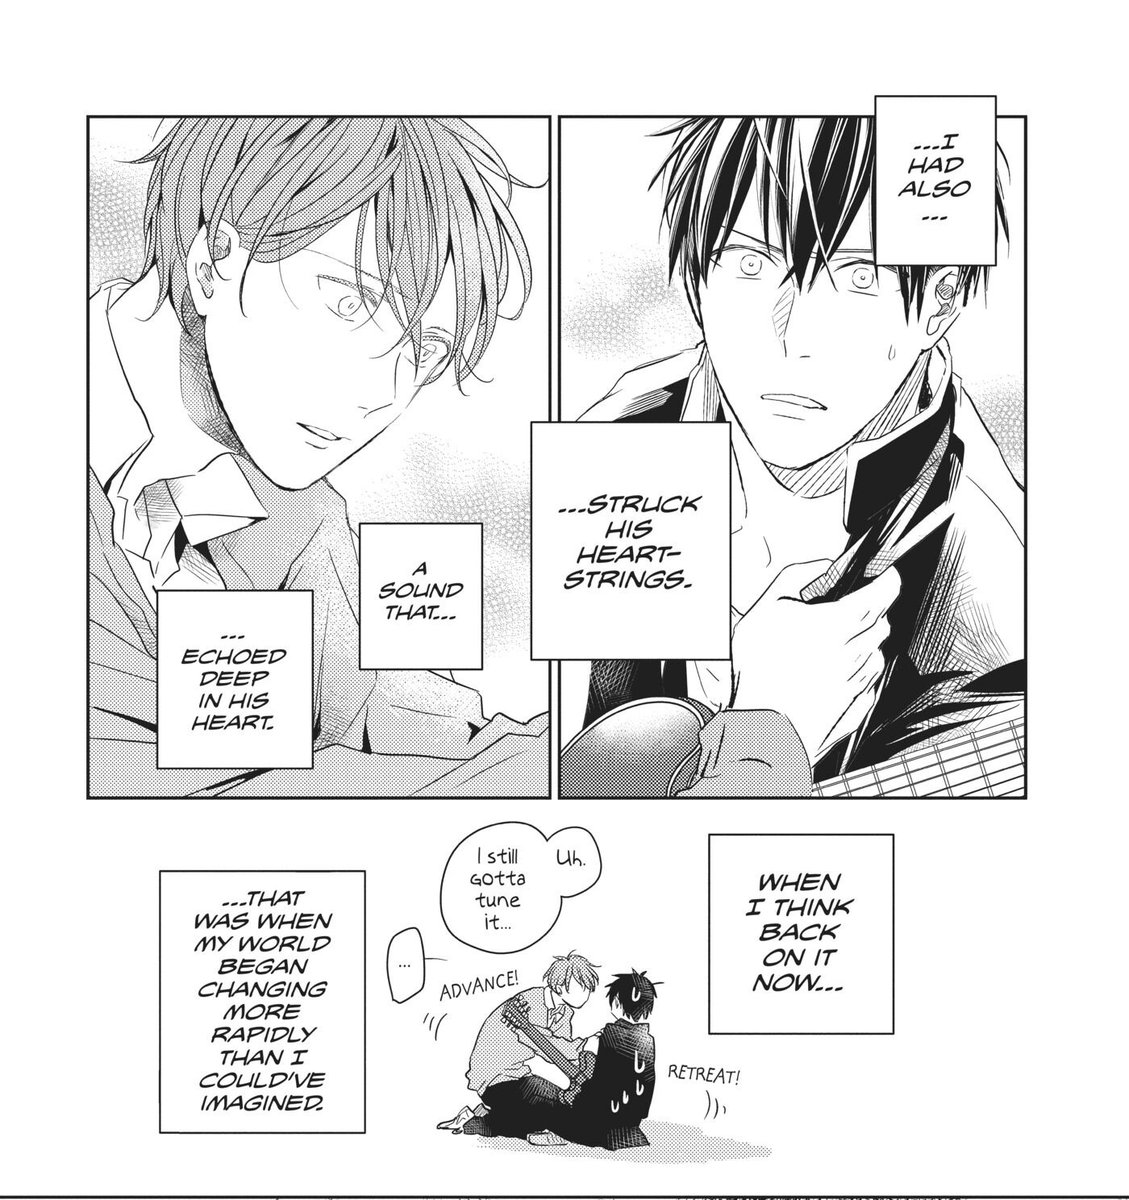 +more to Ritsuka.2) Regarding Mafuyu, it's important for Ritsuka to remember he is the one who always touched Mafuyu's heart the most. No matter how close friends Hiiragi had been to him, or no matter how much Yuki once might have meant to him, Ritsuka is the one who has been+